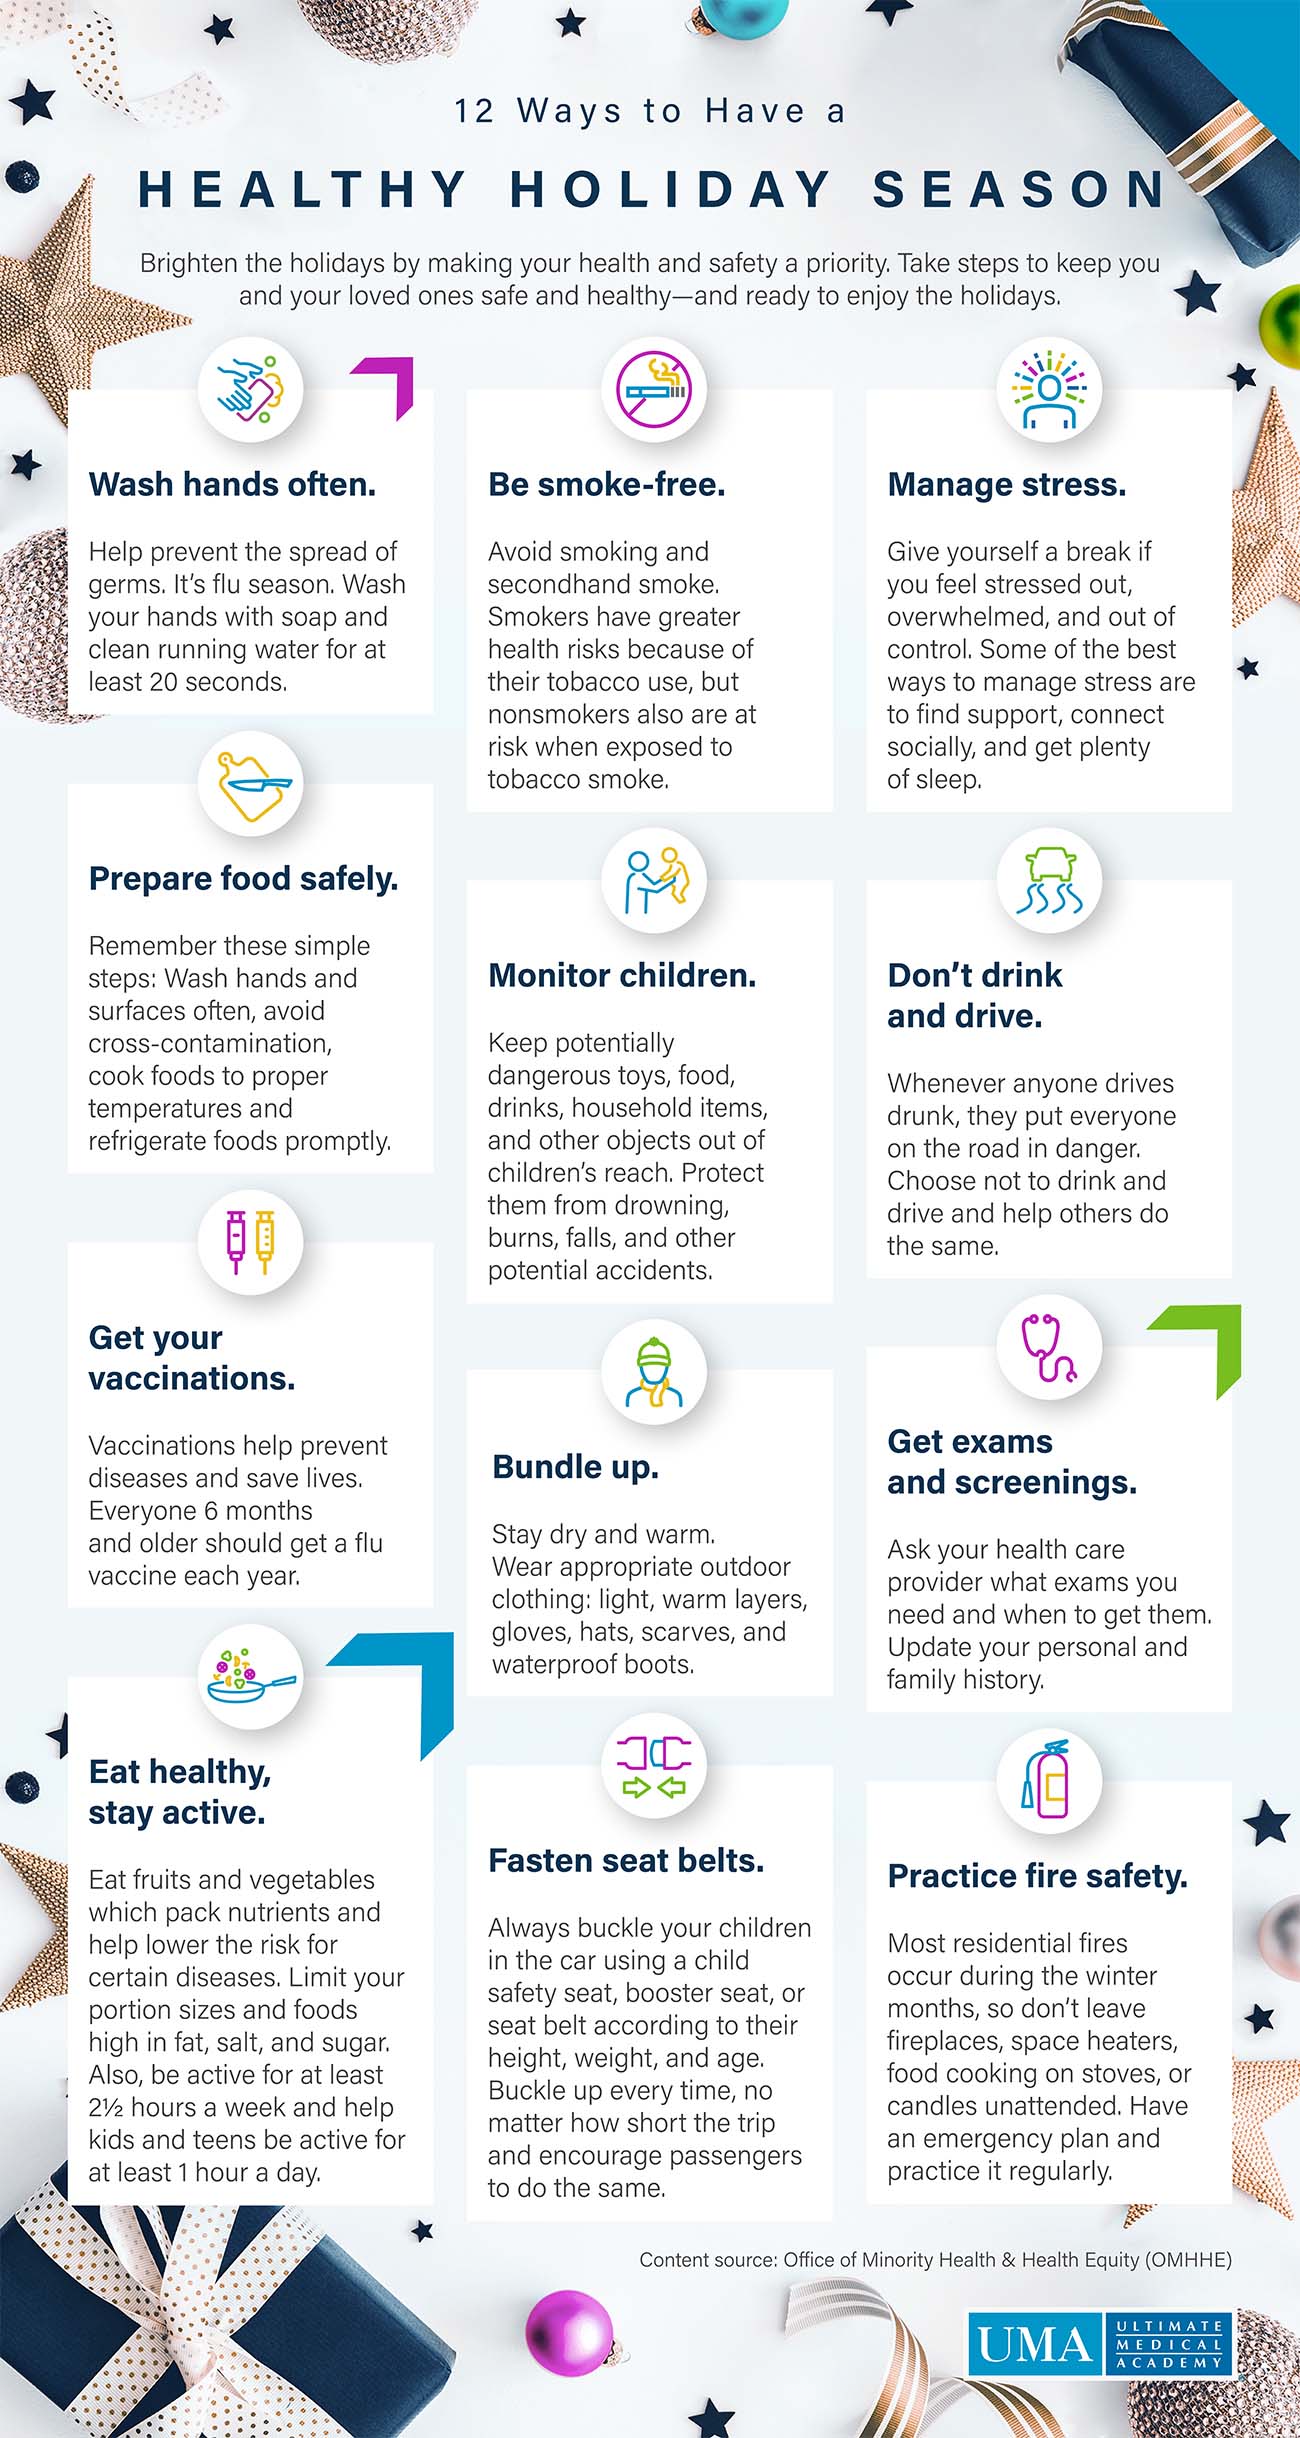 12 Ways to Have a Healthy Holiday Season infographic